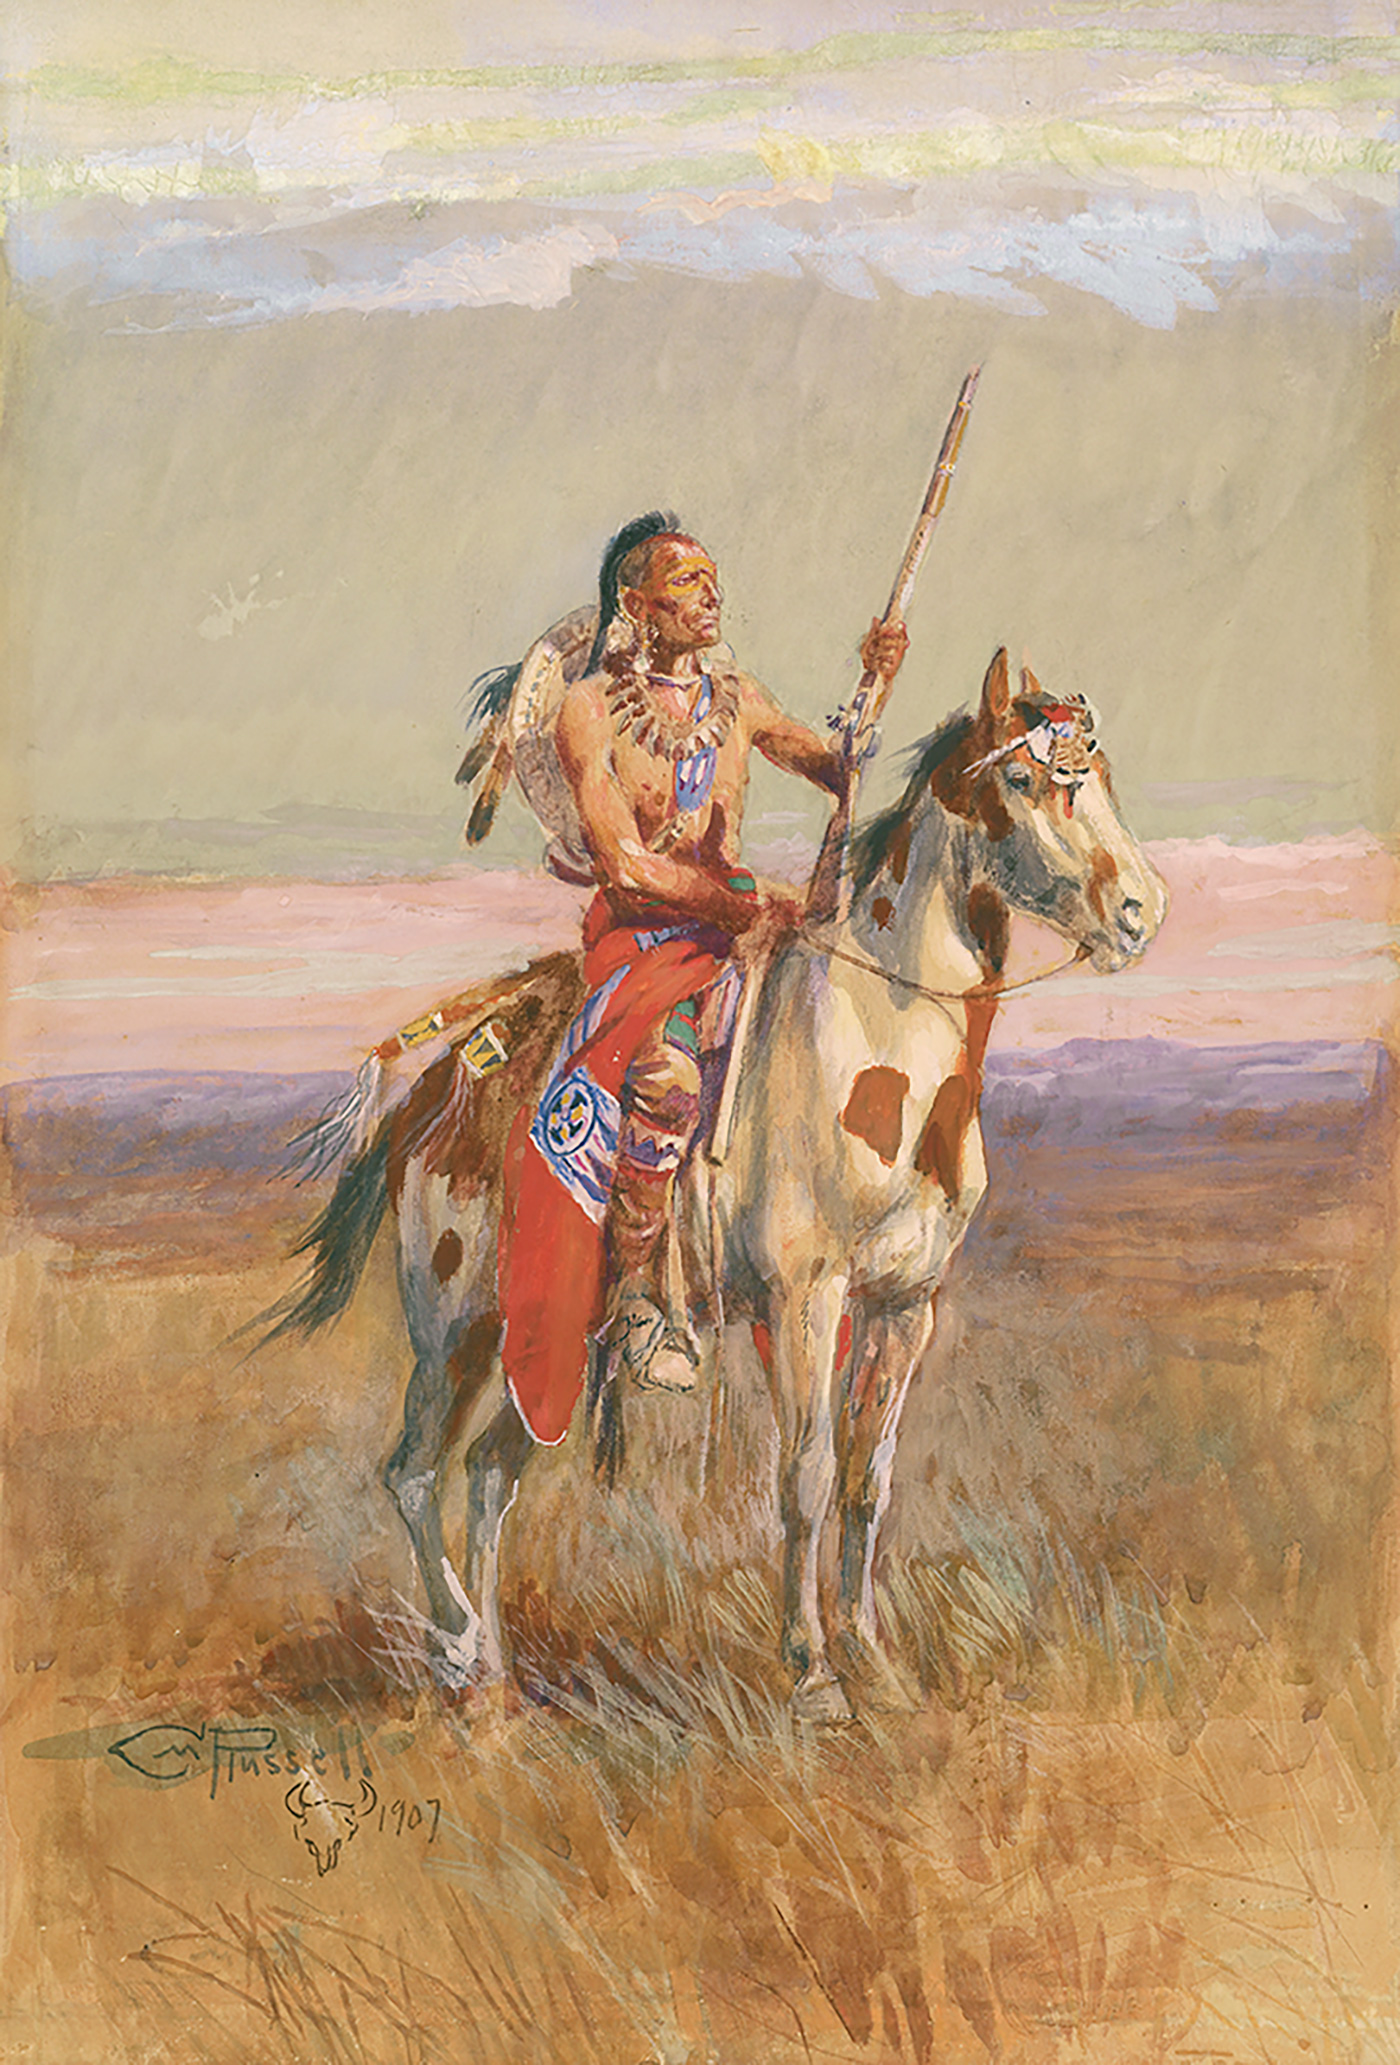 A lone Pawnee man pauses on his horse in a grassland.